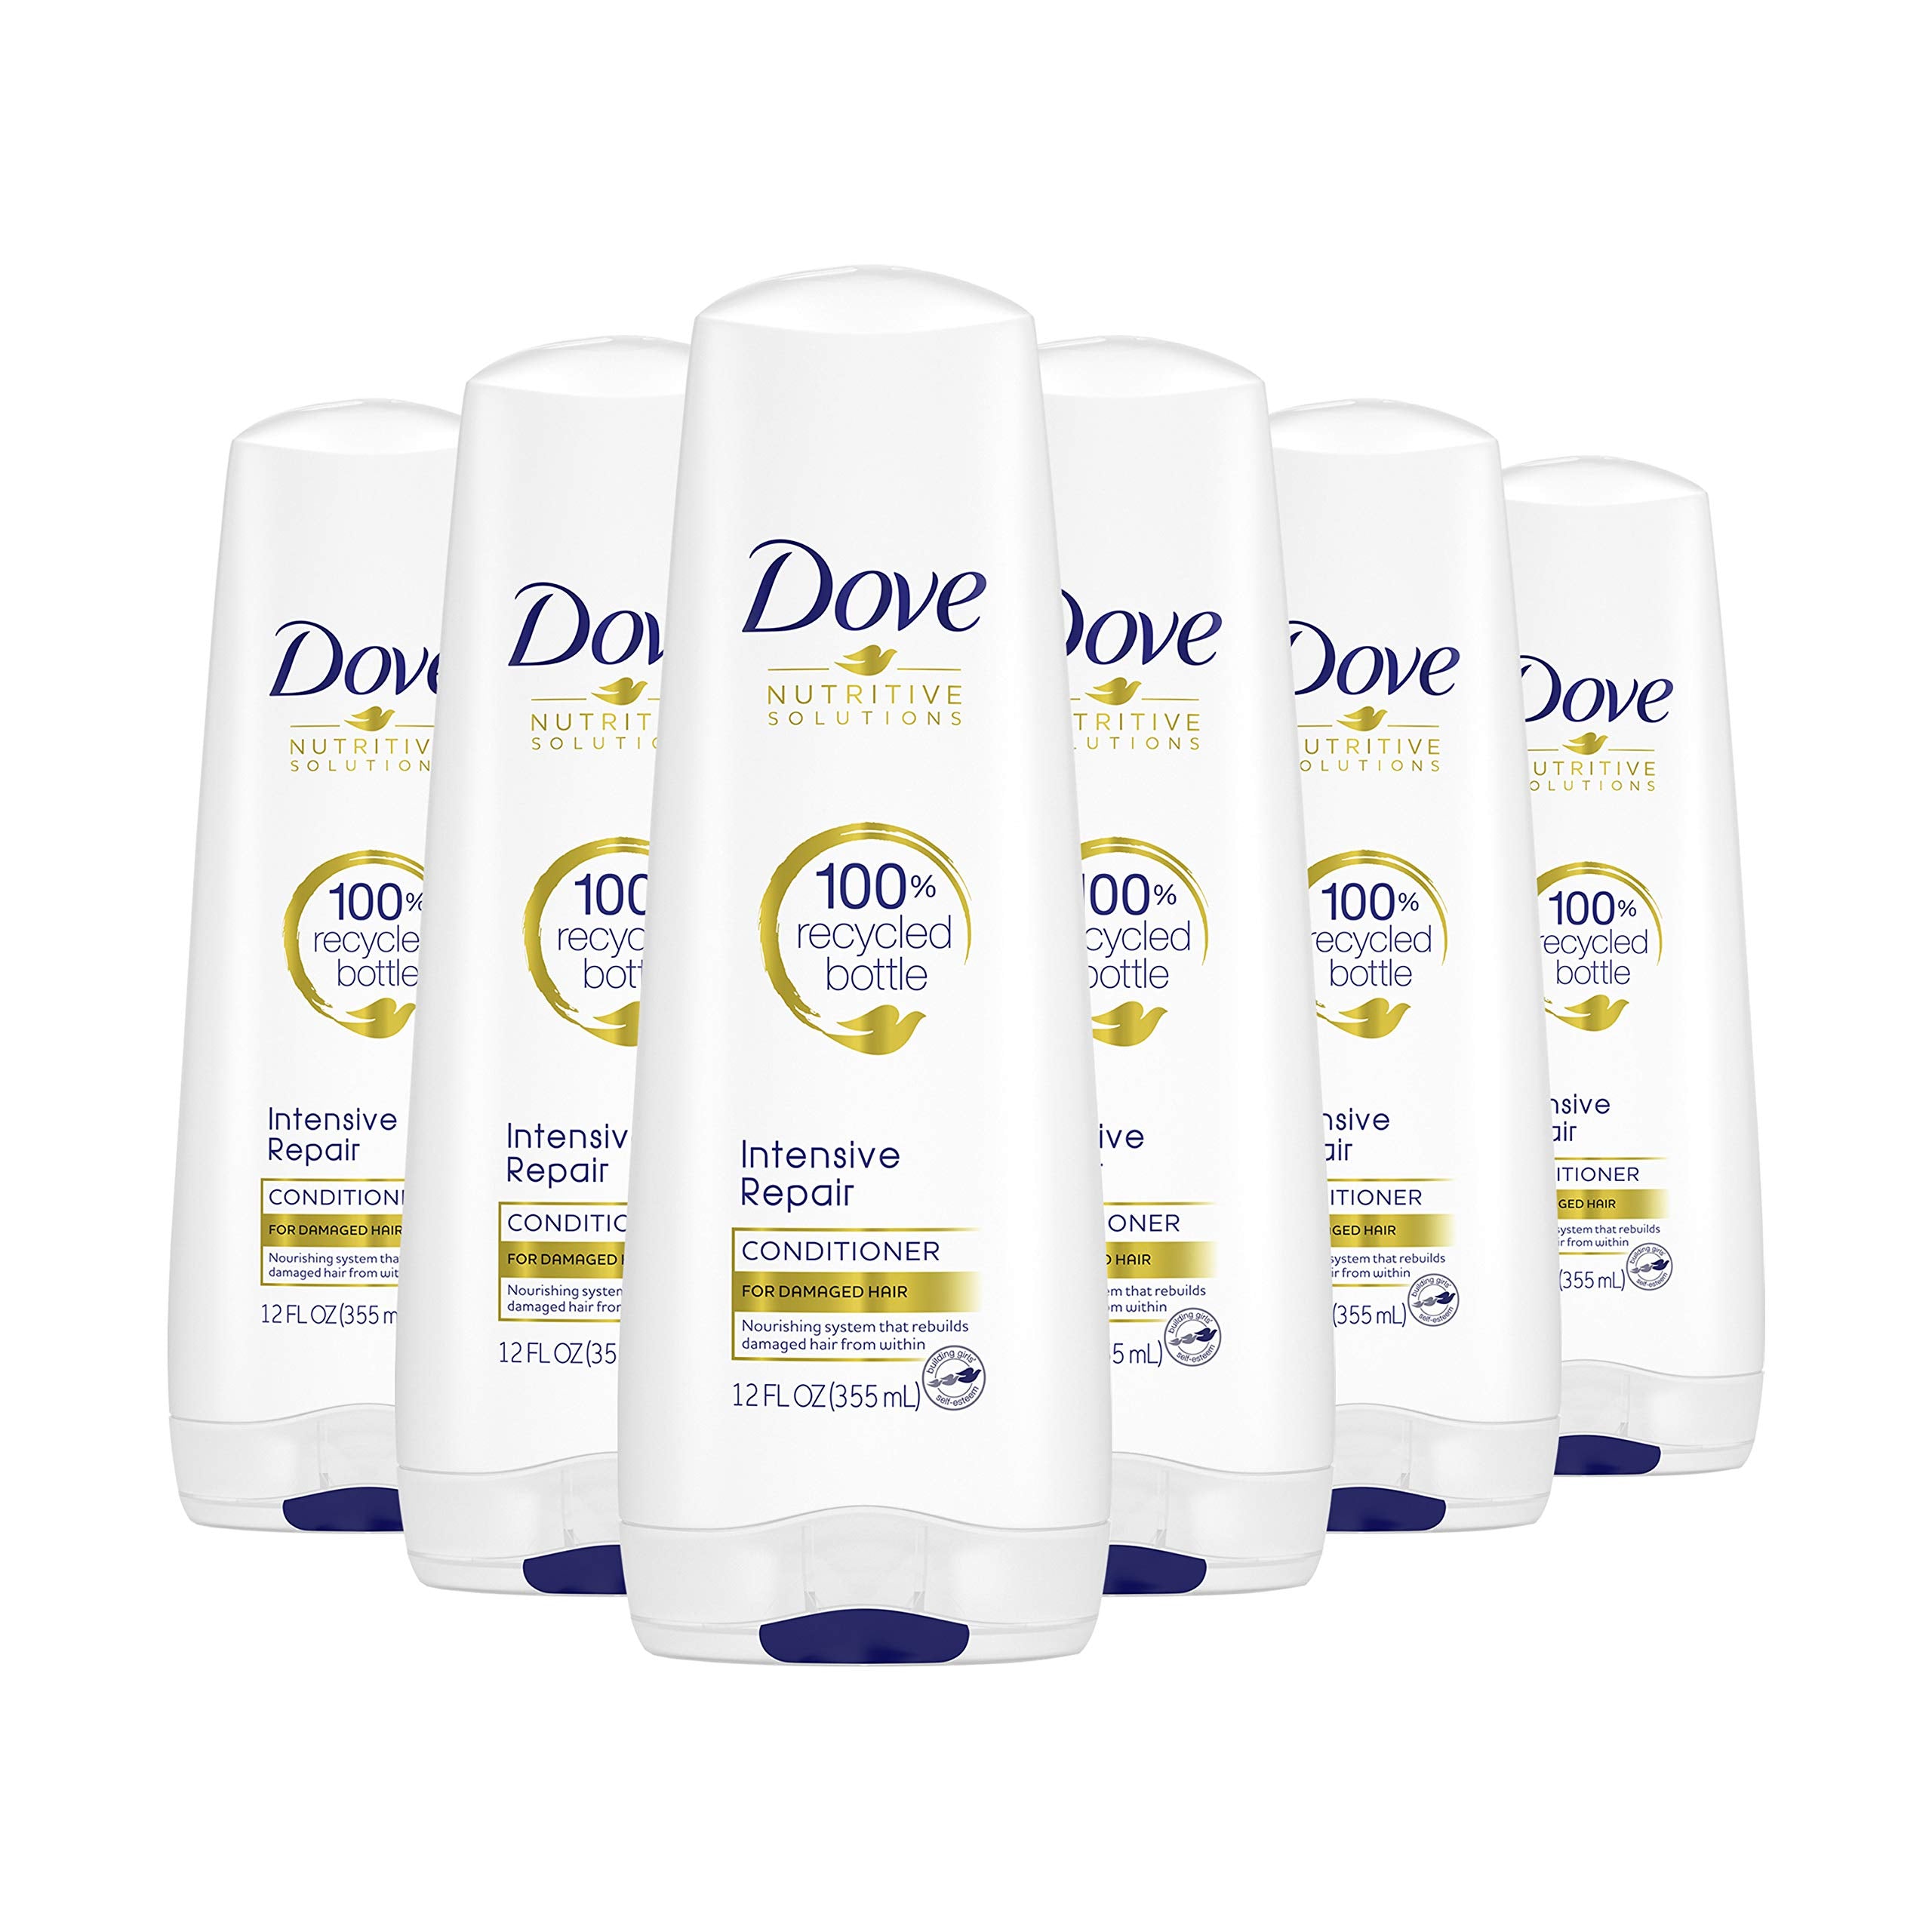 Dove Nutritive Solutions Strengthening Conditioner for Damaged Hair Intensive Repair Deep Conditioner Formula with Keratin Actives 12 oz, Pack of 6